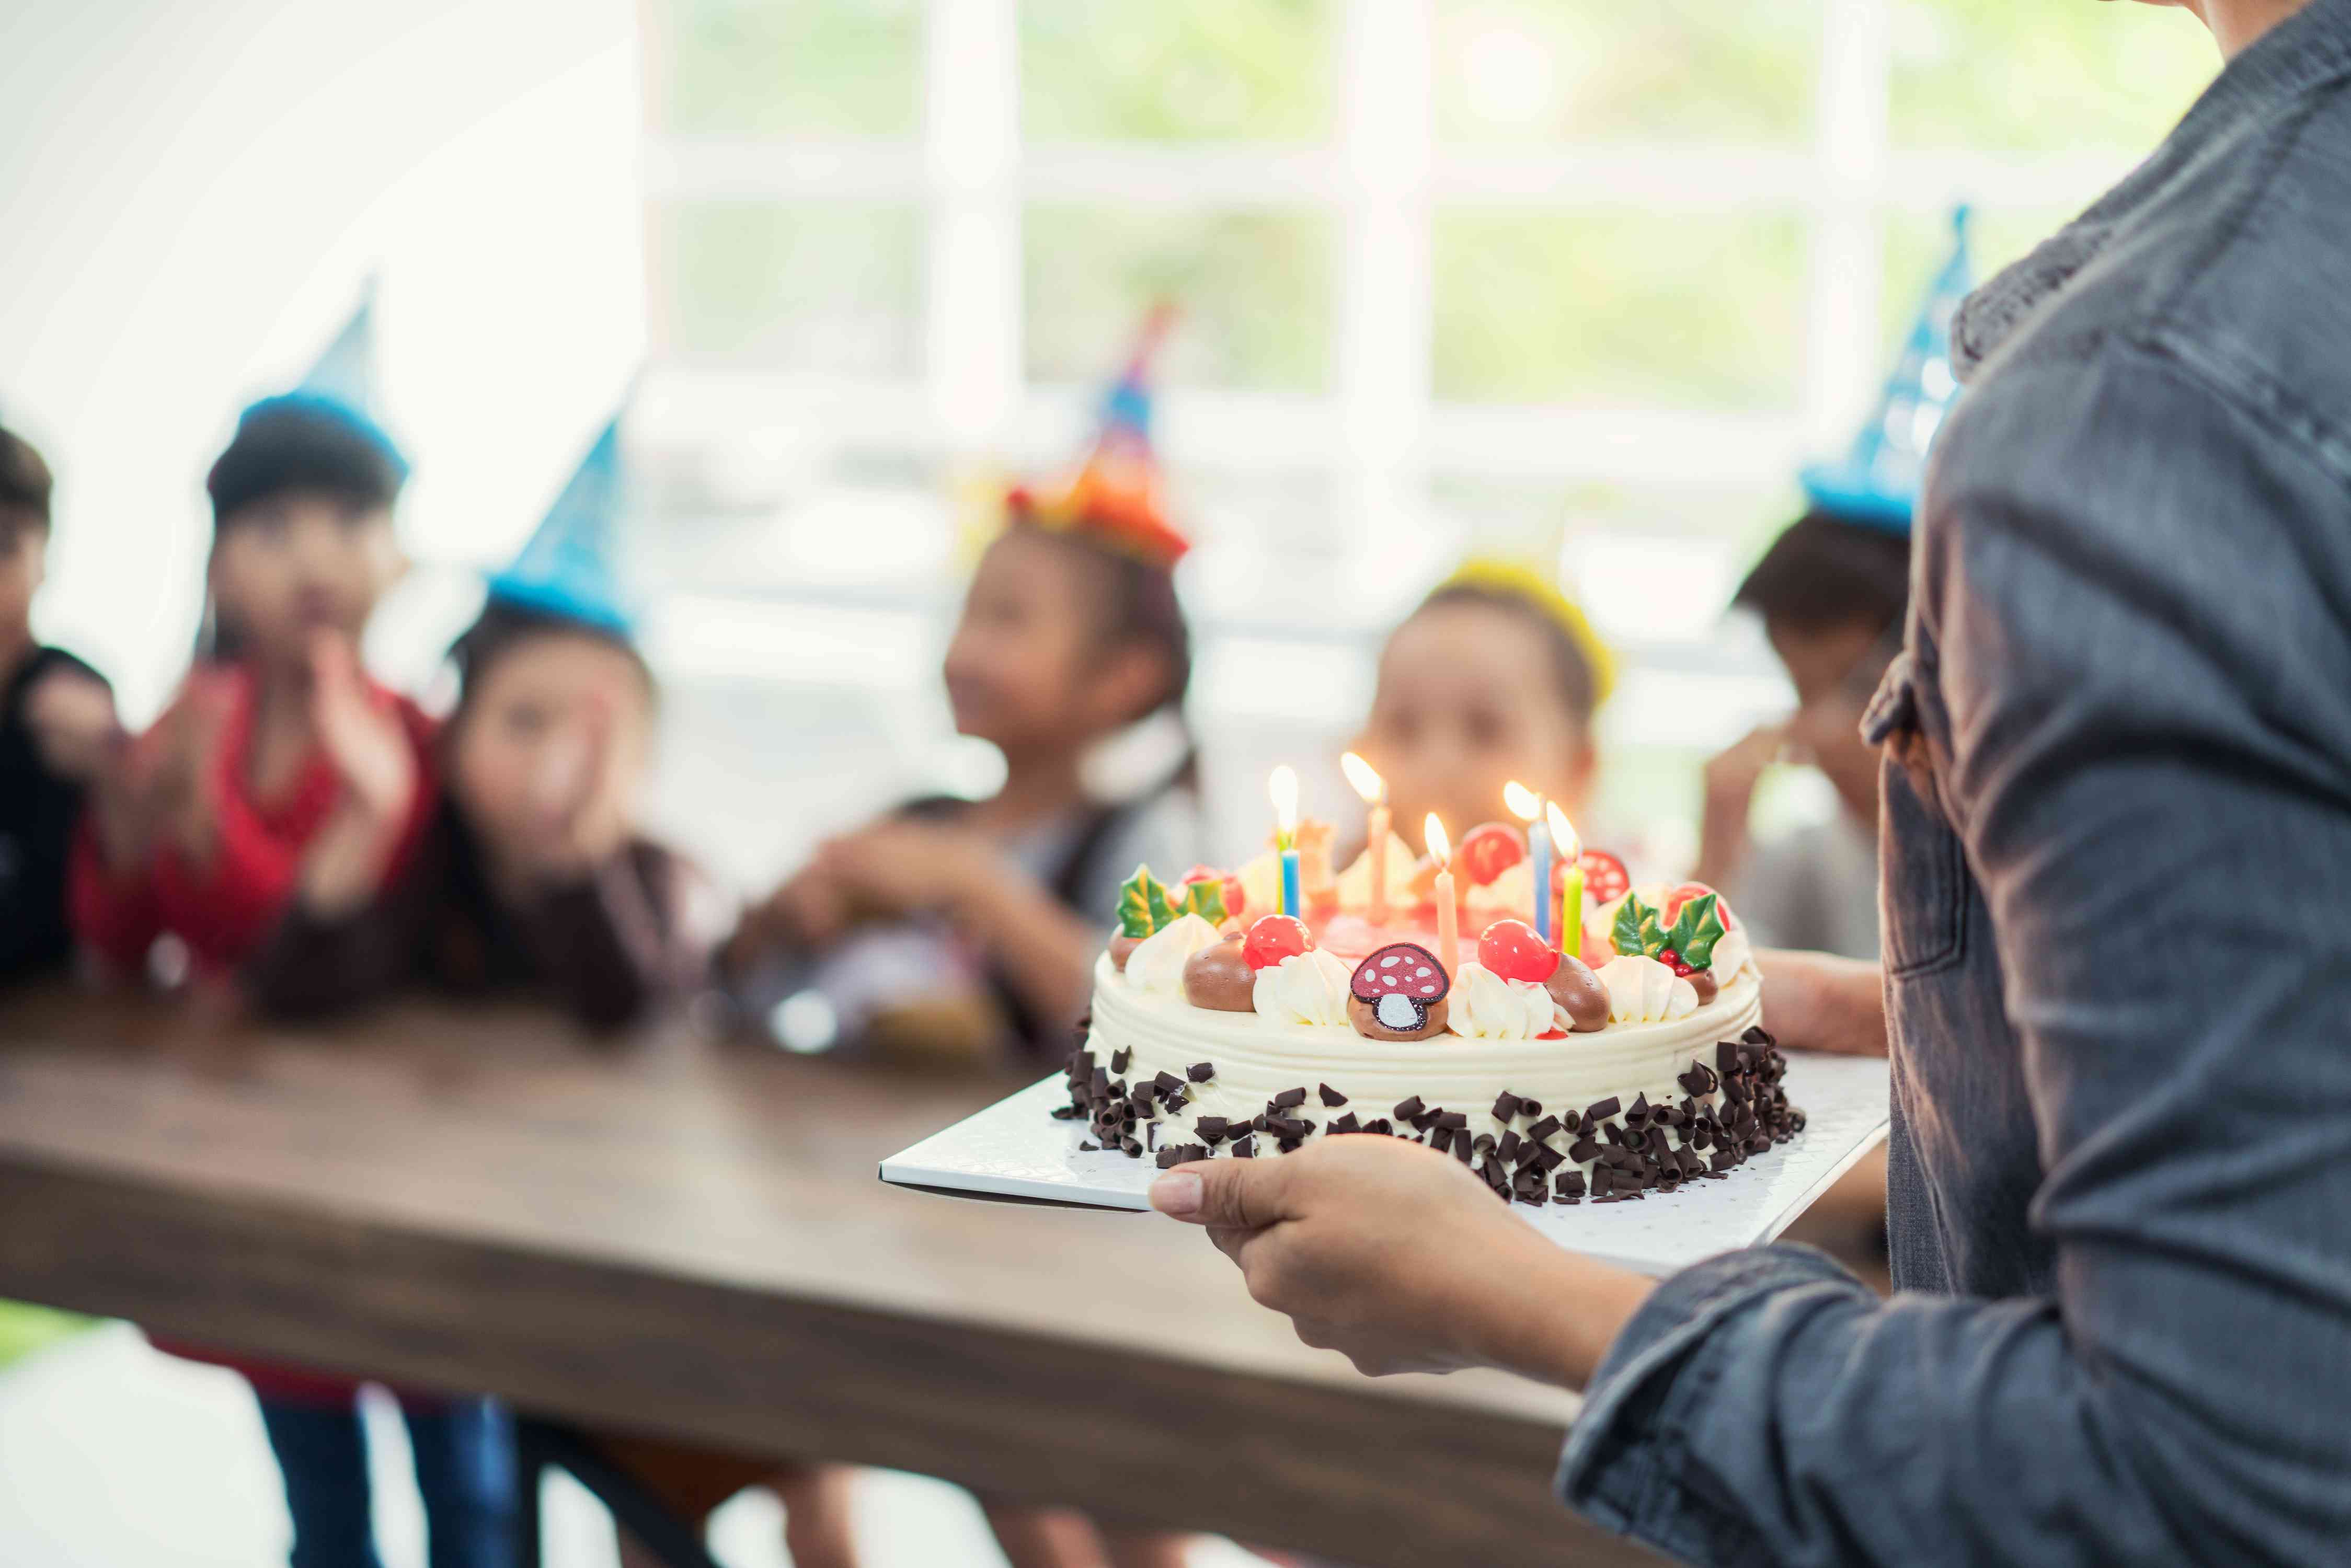 Mom Stirs Controversy After Allowing All Of Her Kids To Blow Out The Birthday Child's Candles